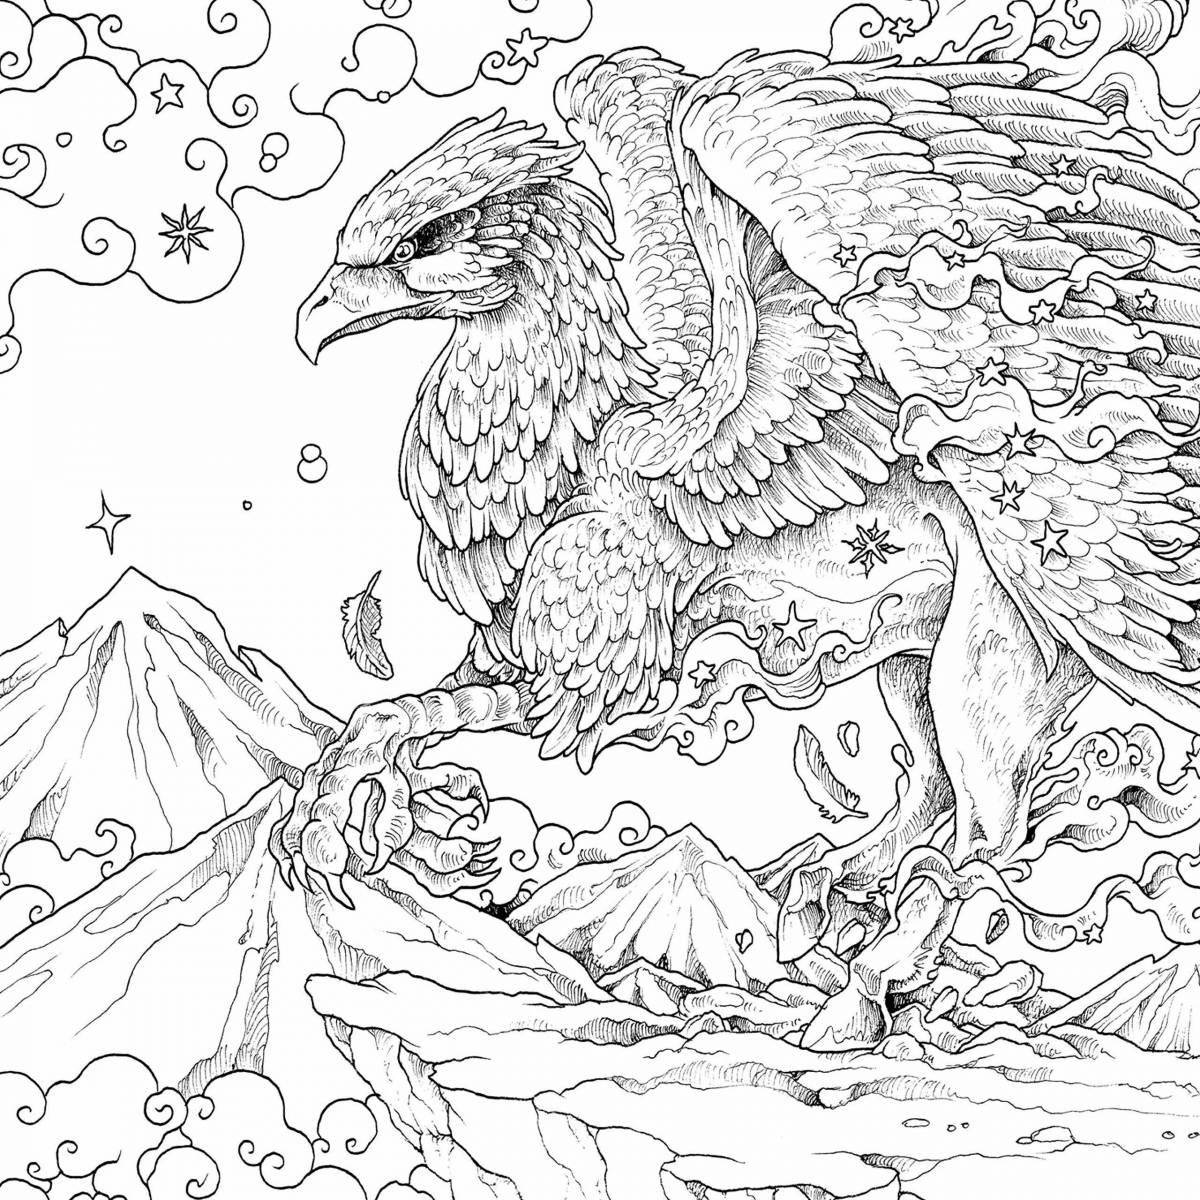 Furious Mythomorphs coloring page